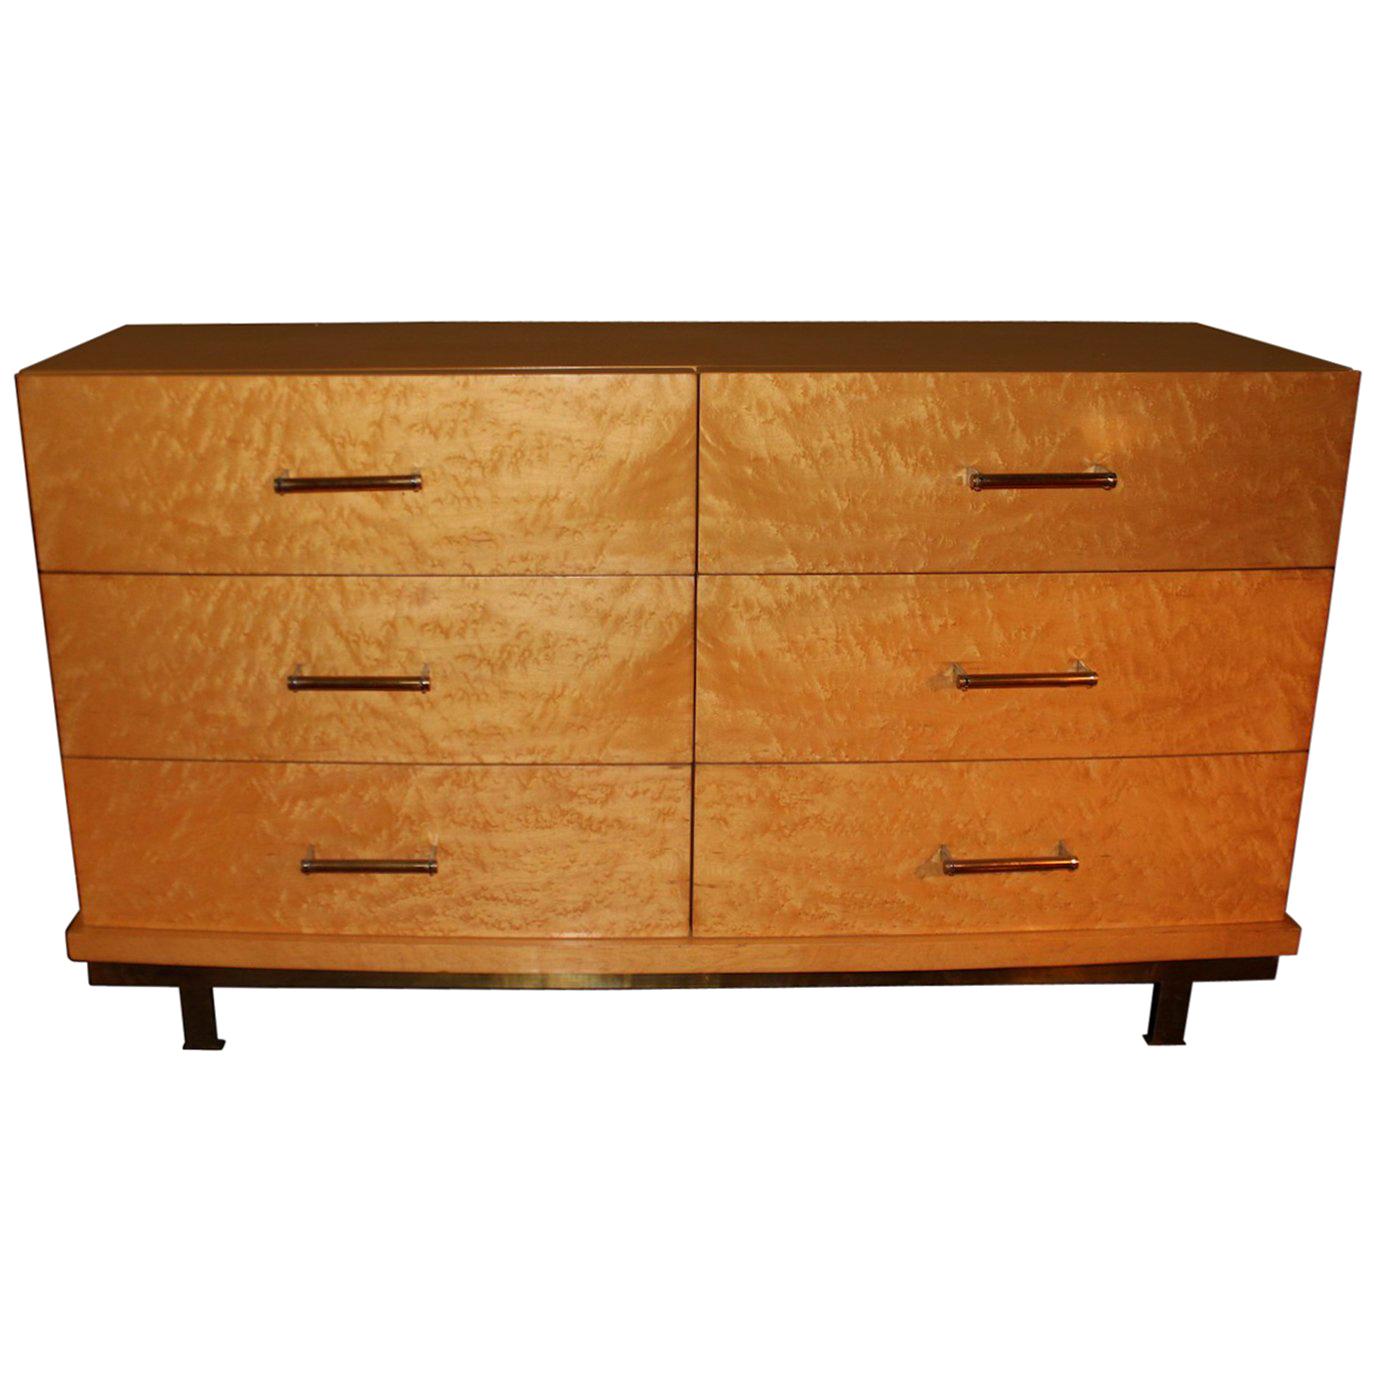 Midcentury Italian Cedar Wood Pair of Chest of Drawers with Brass Finishings For Sale